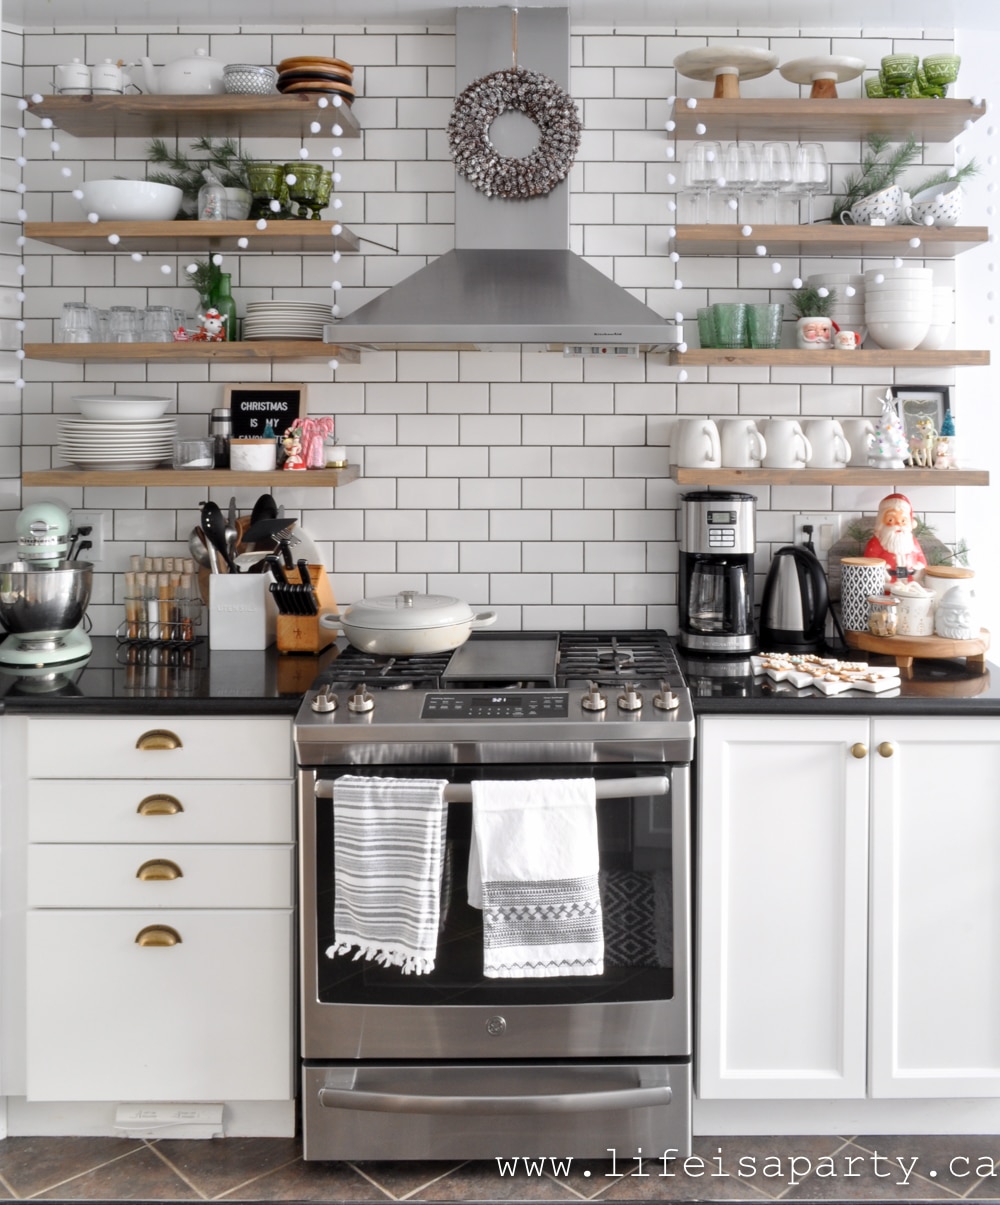 Open kitchen shelves decorated for Christmas with green decor